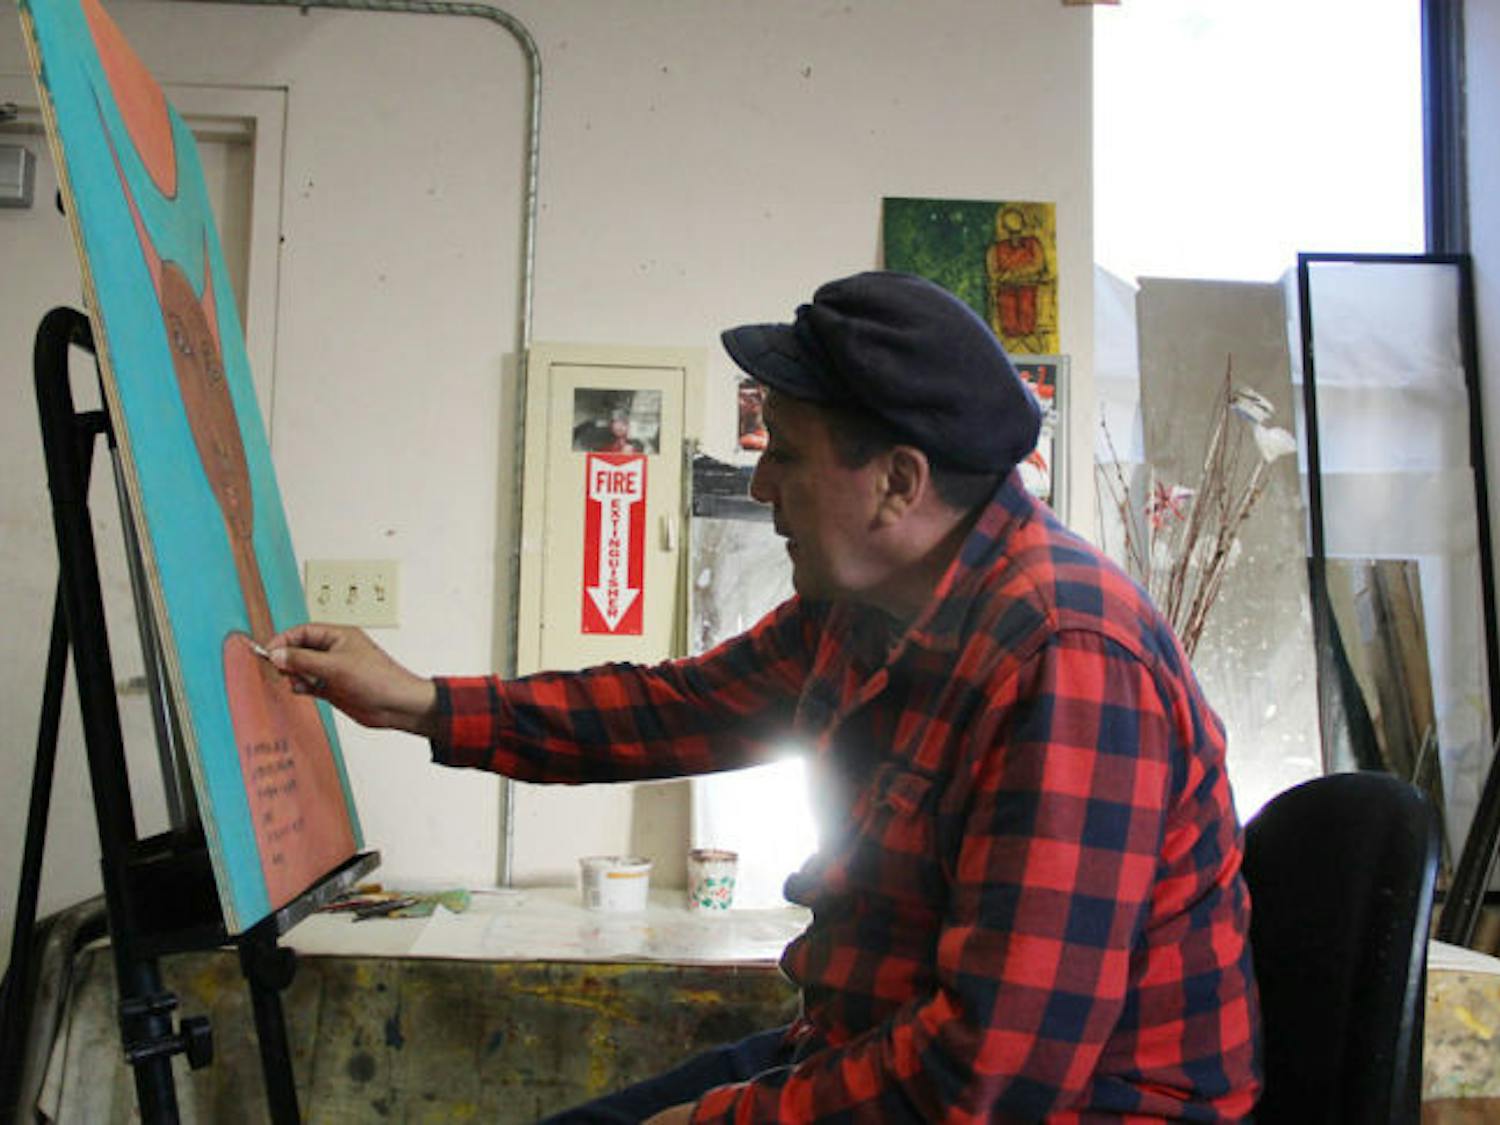 Local artist Marco Razo, 50, puts some finishing touches on his latest painting at Sweetwater Print Co-Op, 117 S. Main St., Saturday afternoon. His new exhibition, Meditaciones de un Quijote (Meditations of a Quixote), is opening Feb. 19 at the Hippodrome Gallery, 25 SE Second Place.